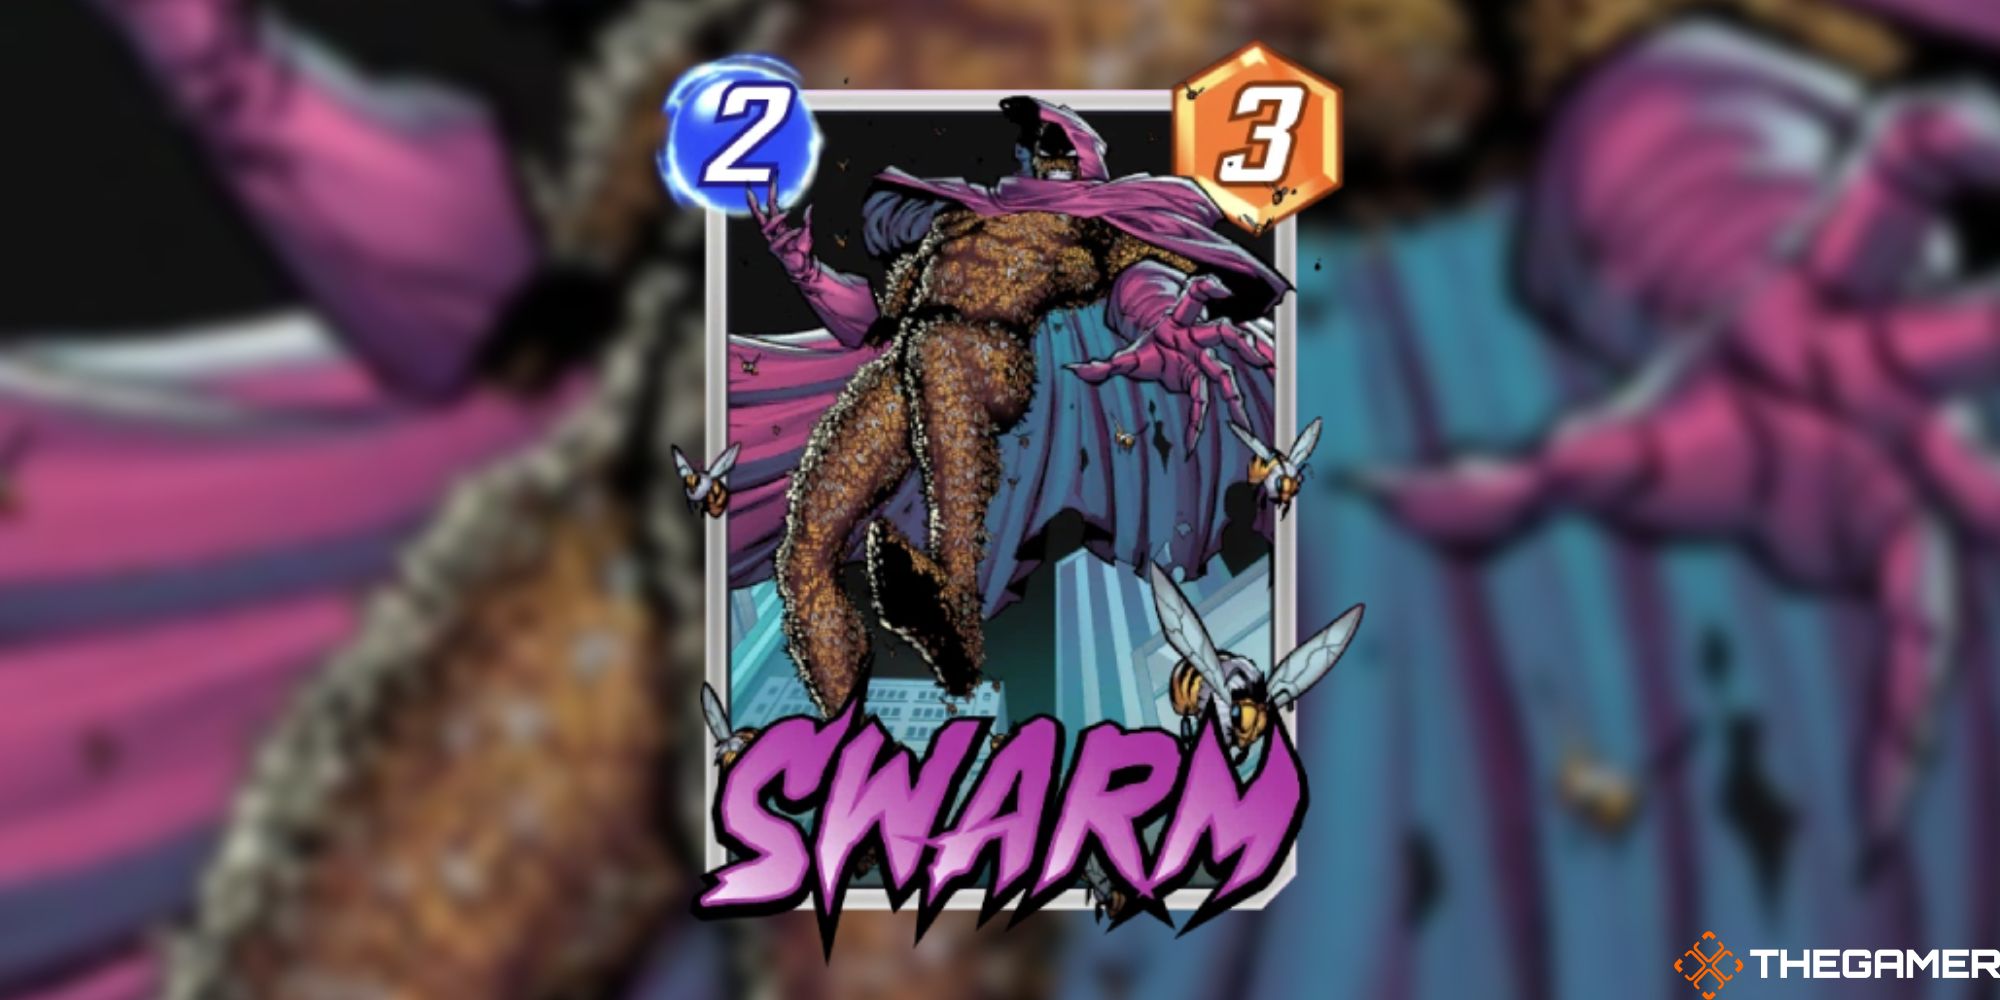 Card art of Swarm by Eric Guerrero and Ryan Kinnaird from Marvel Snap